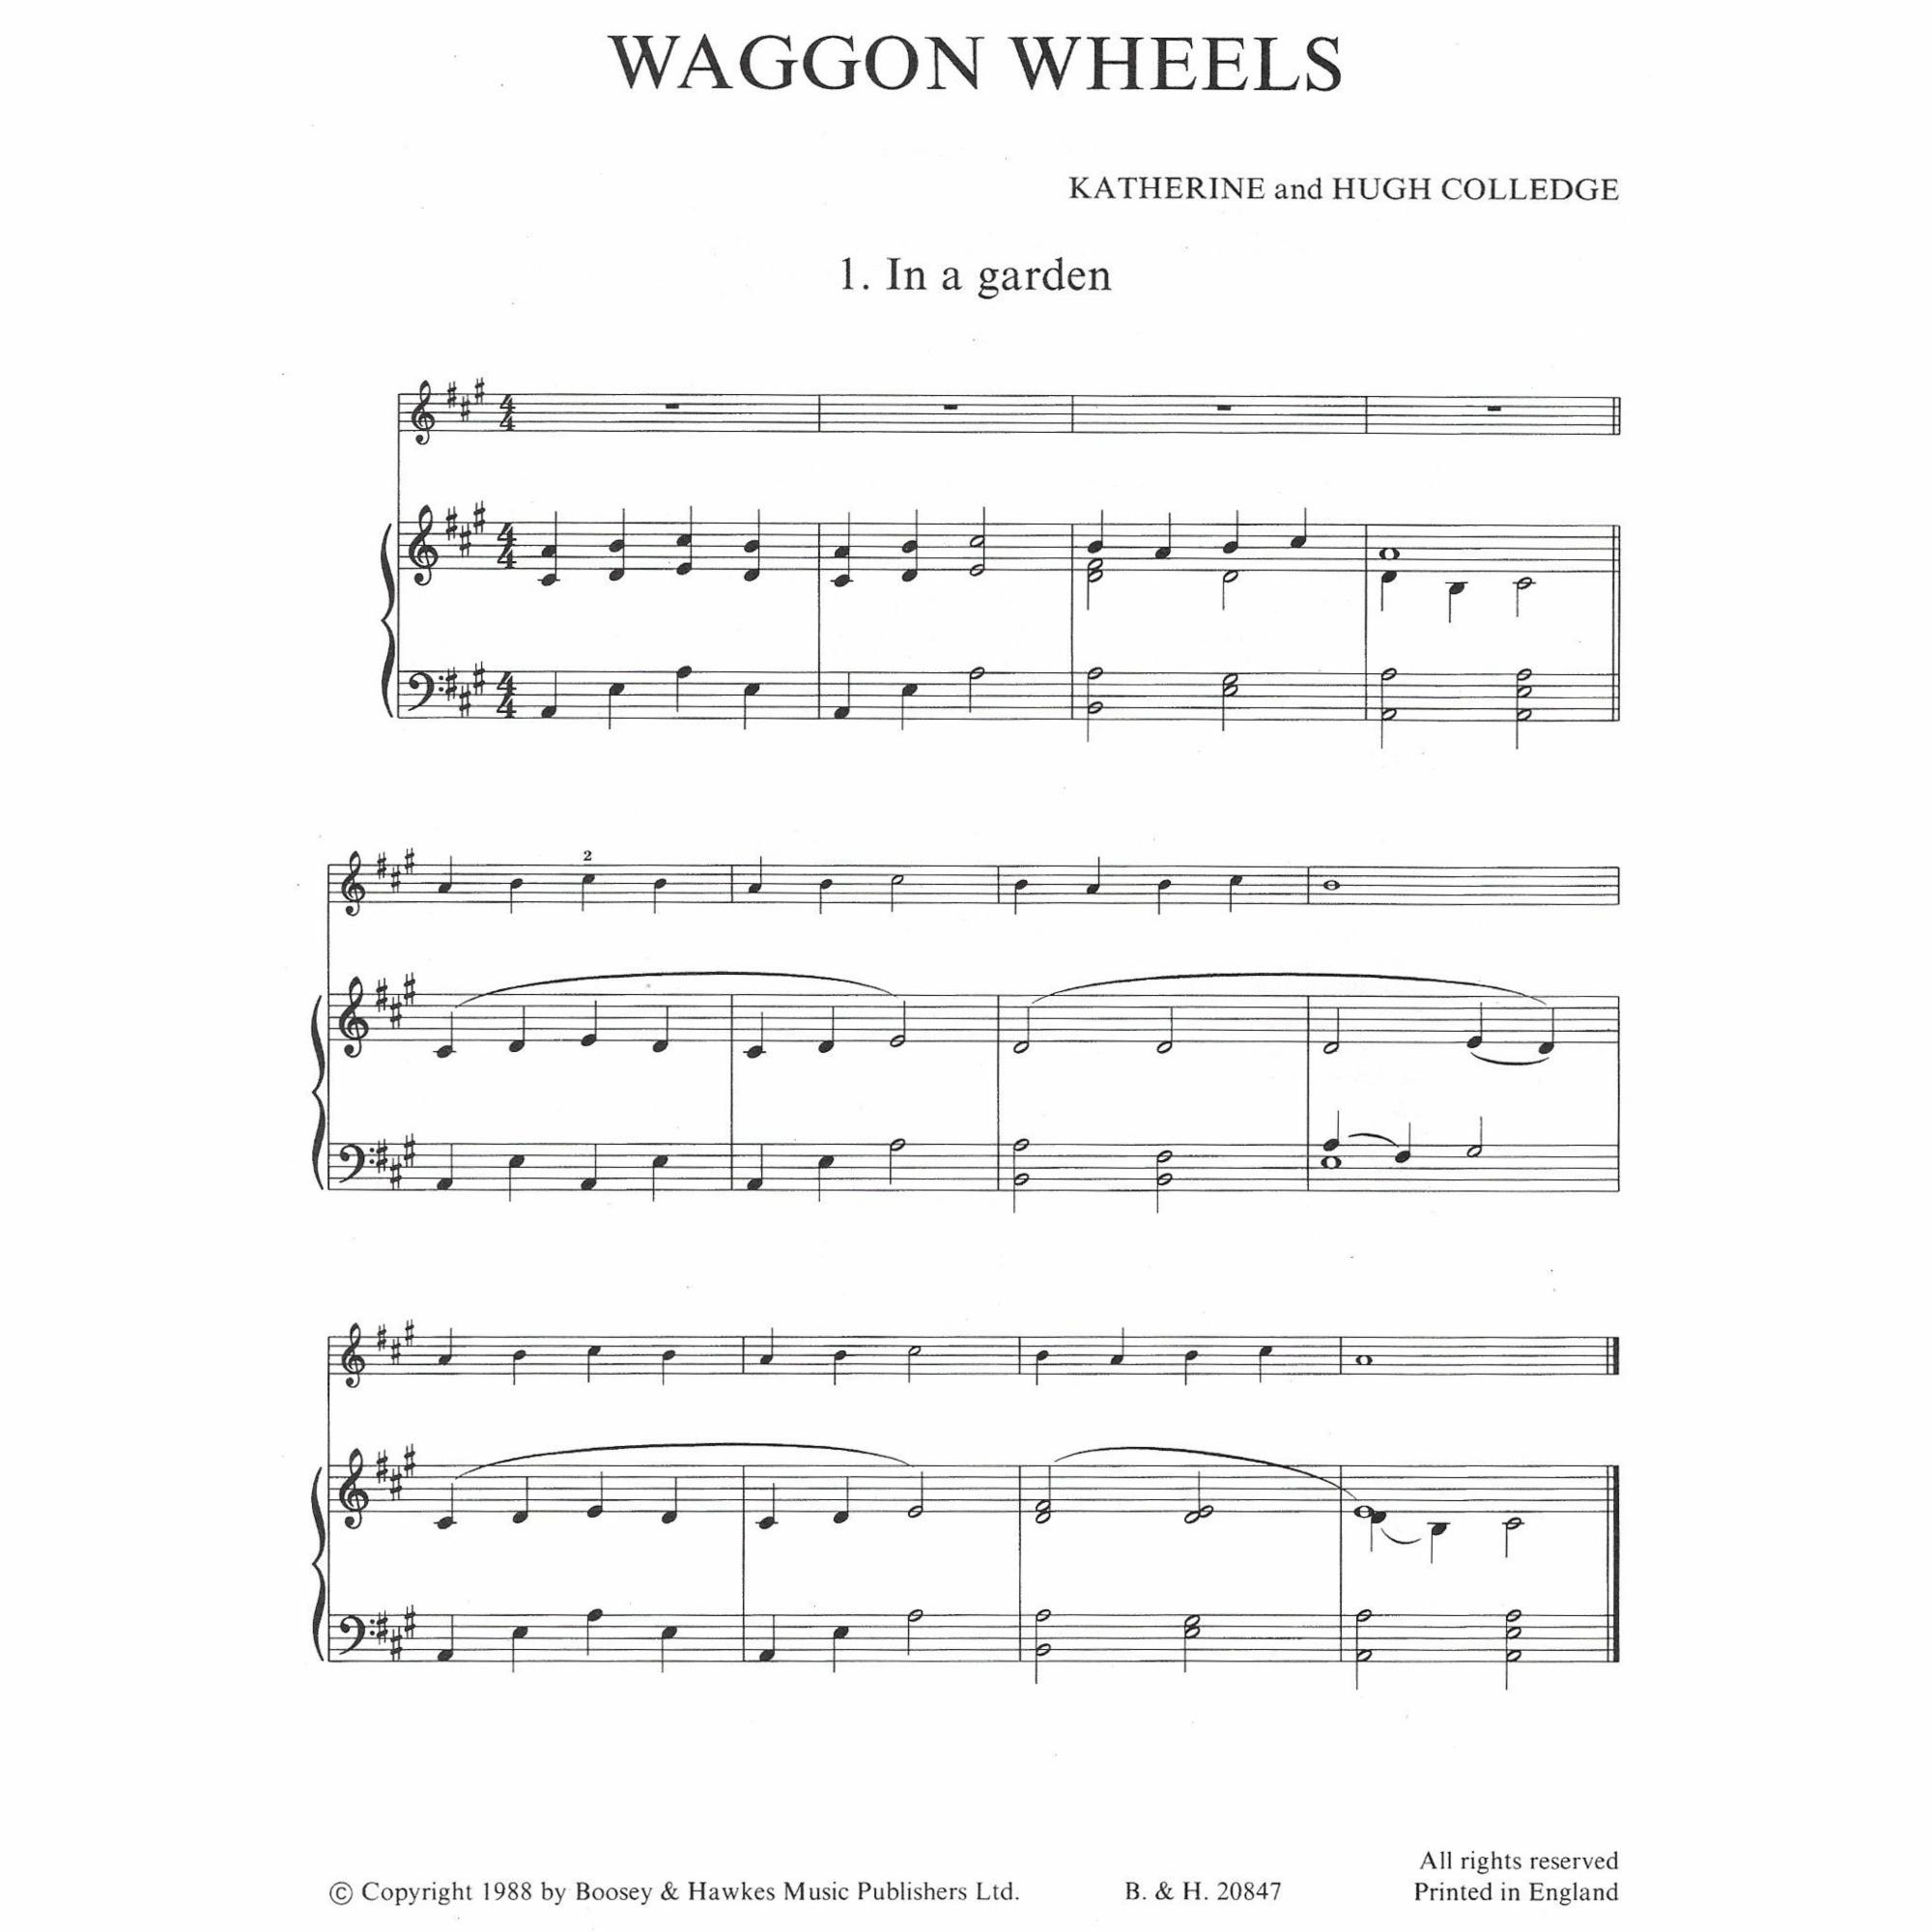 Waggon Wheels for Violin, Viola, or Cello | Southwest Strings